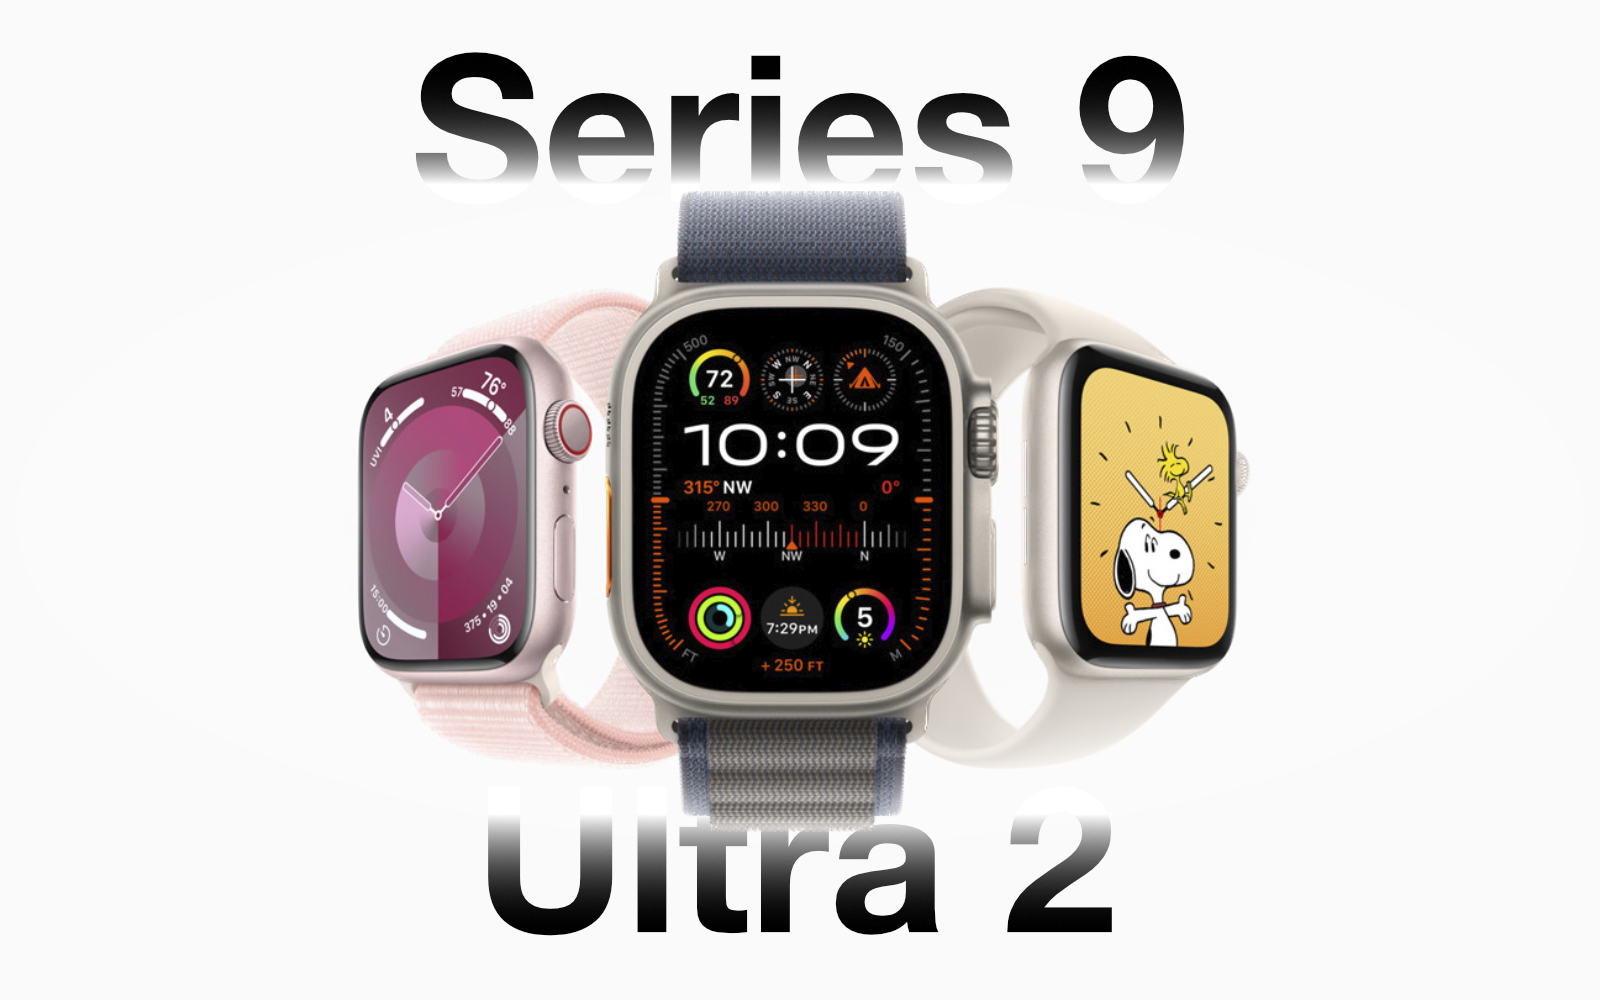 AppleWatchUltra2 and Series9 reviews